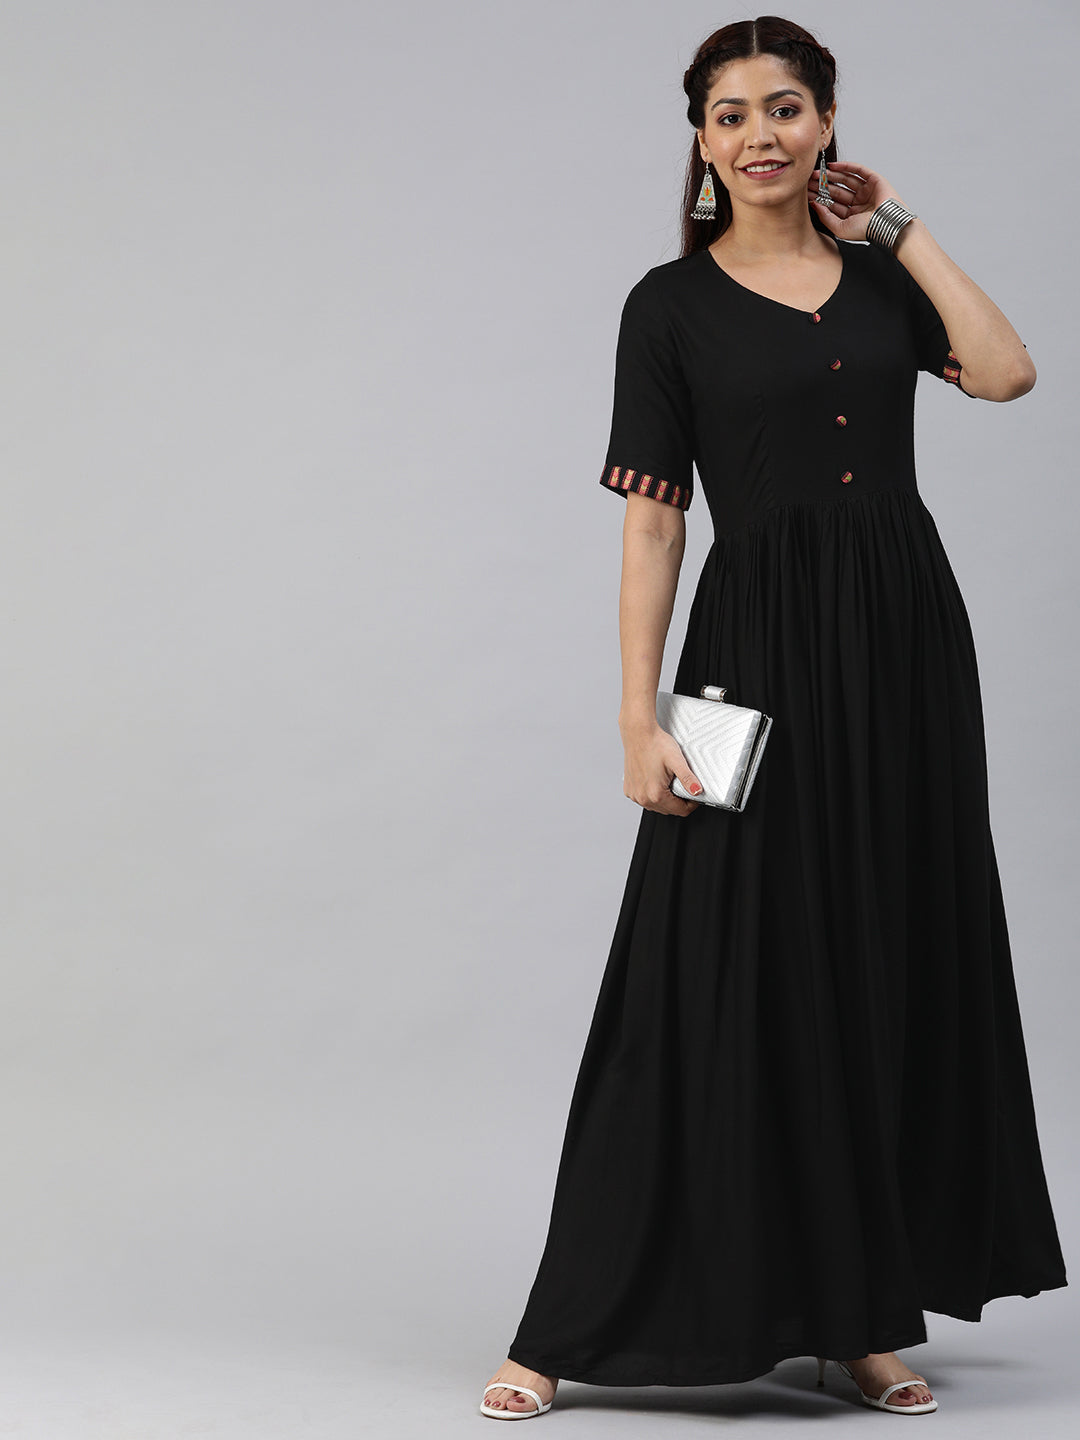 Black Gowns Online: Latest Designs of Black Gowns Shopping